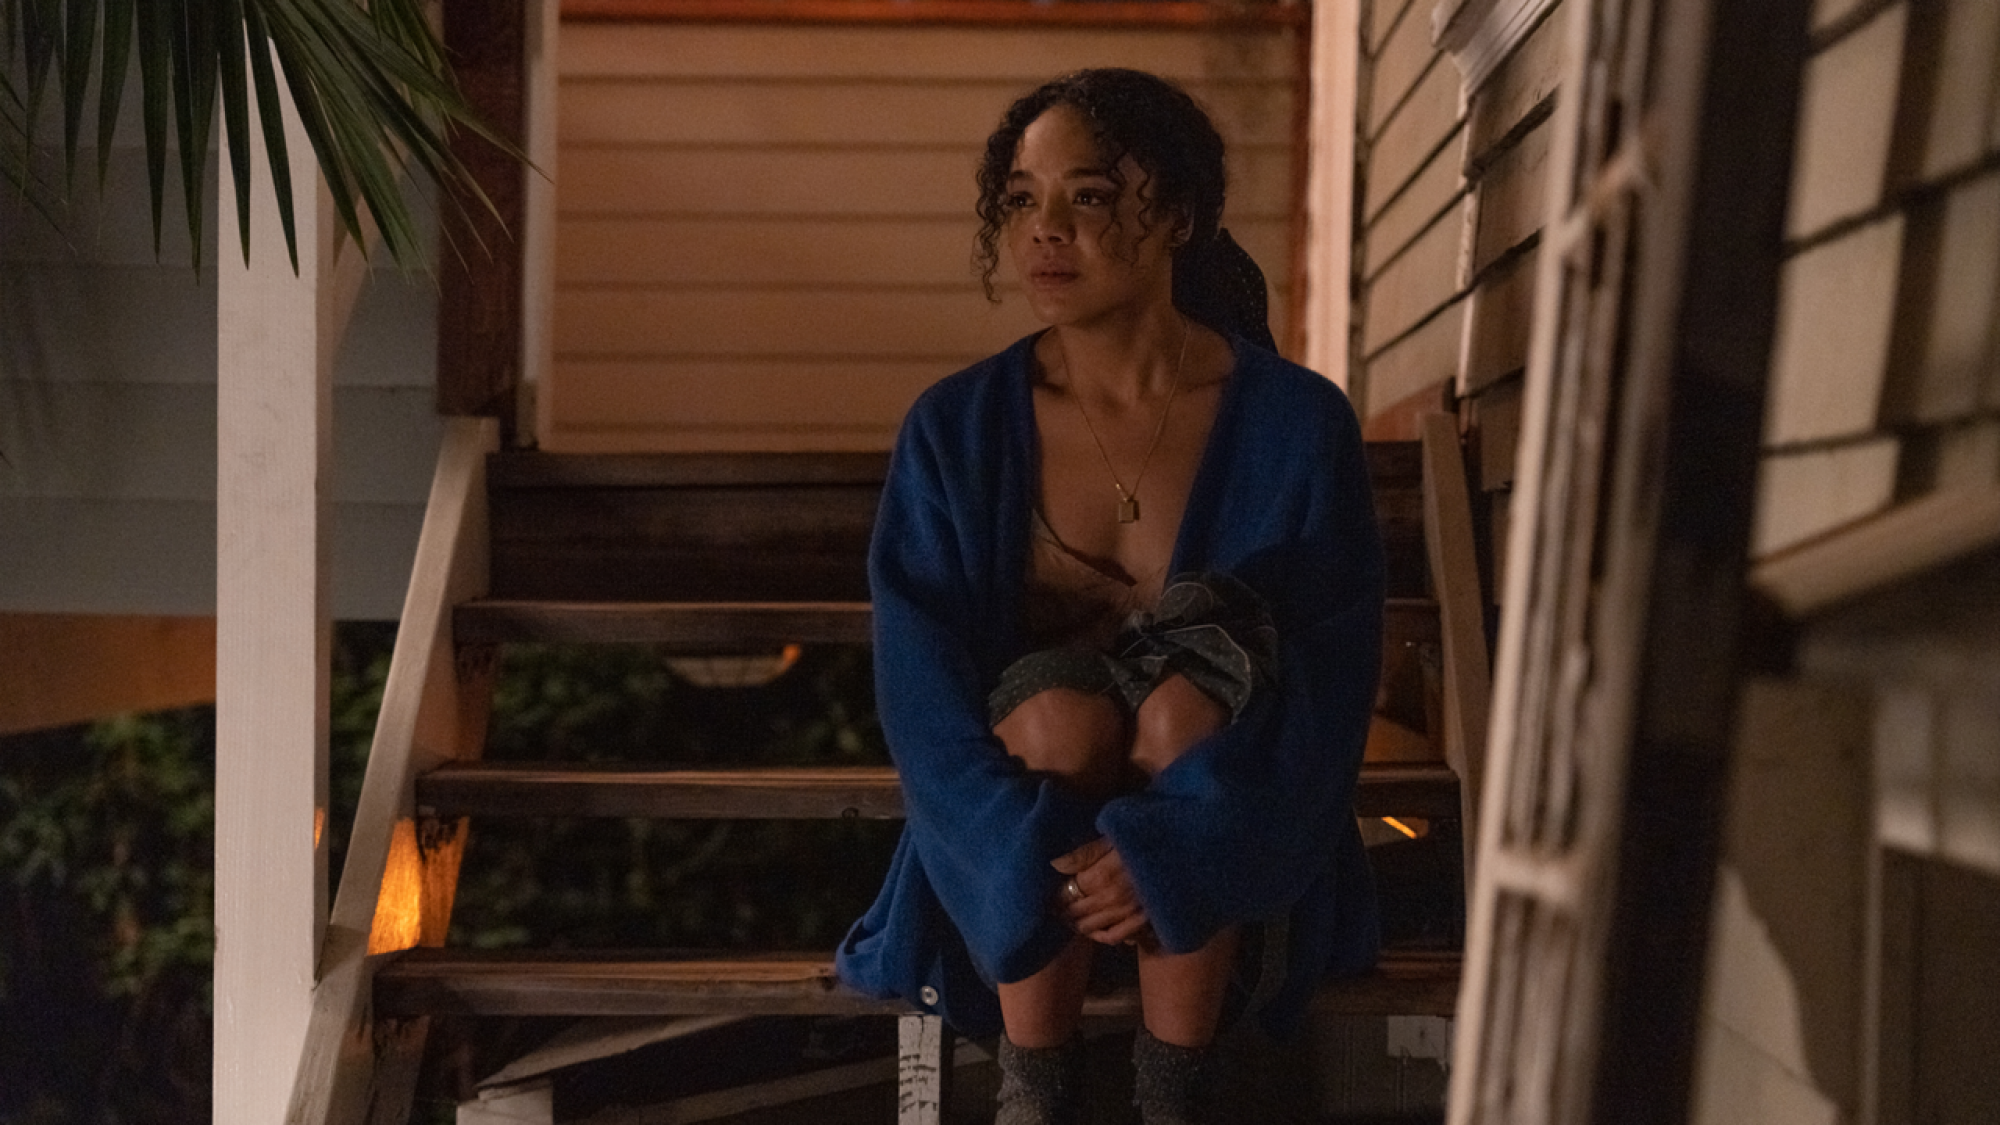 A woman in a blue sweater and pajamas sits on the stairs outside her house.